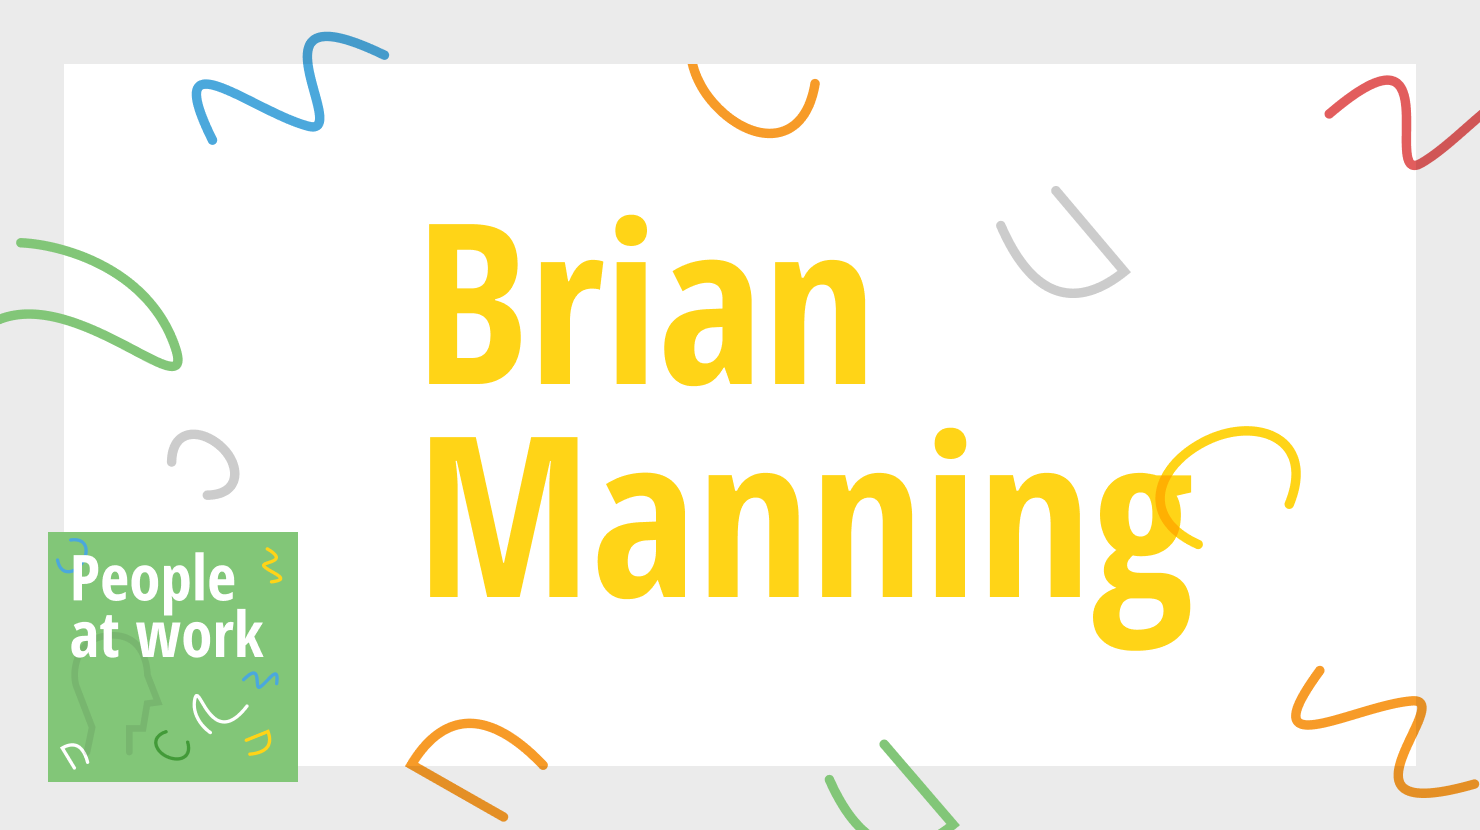 Keeping your culture alive while going through hypergrowth with Brian Manning